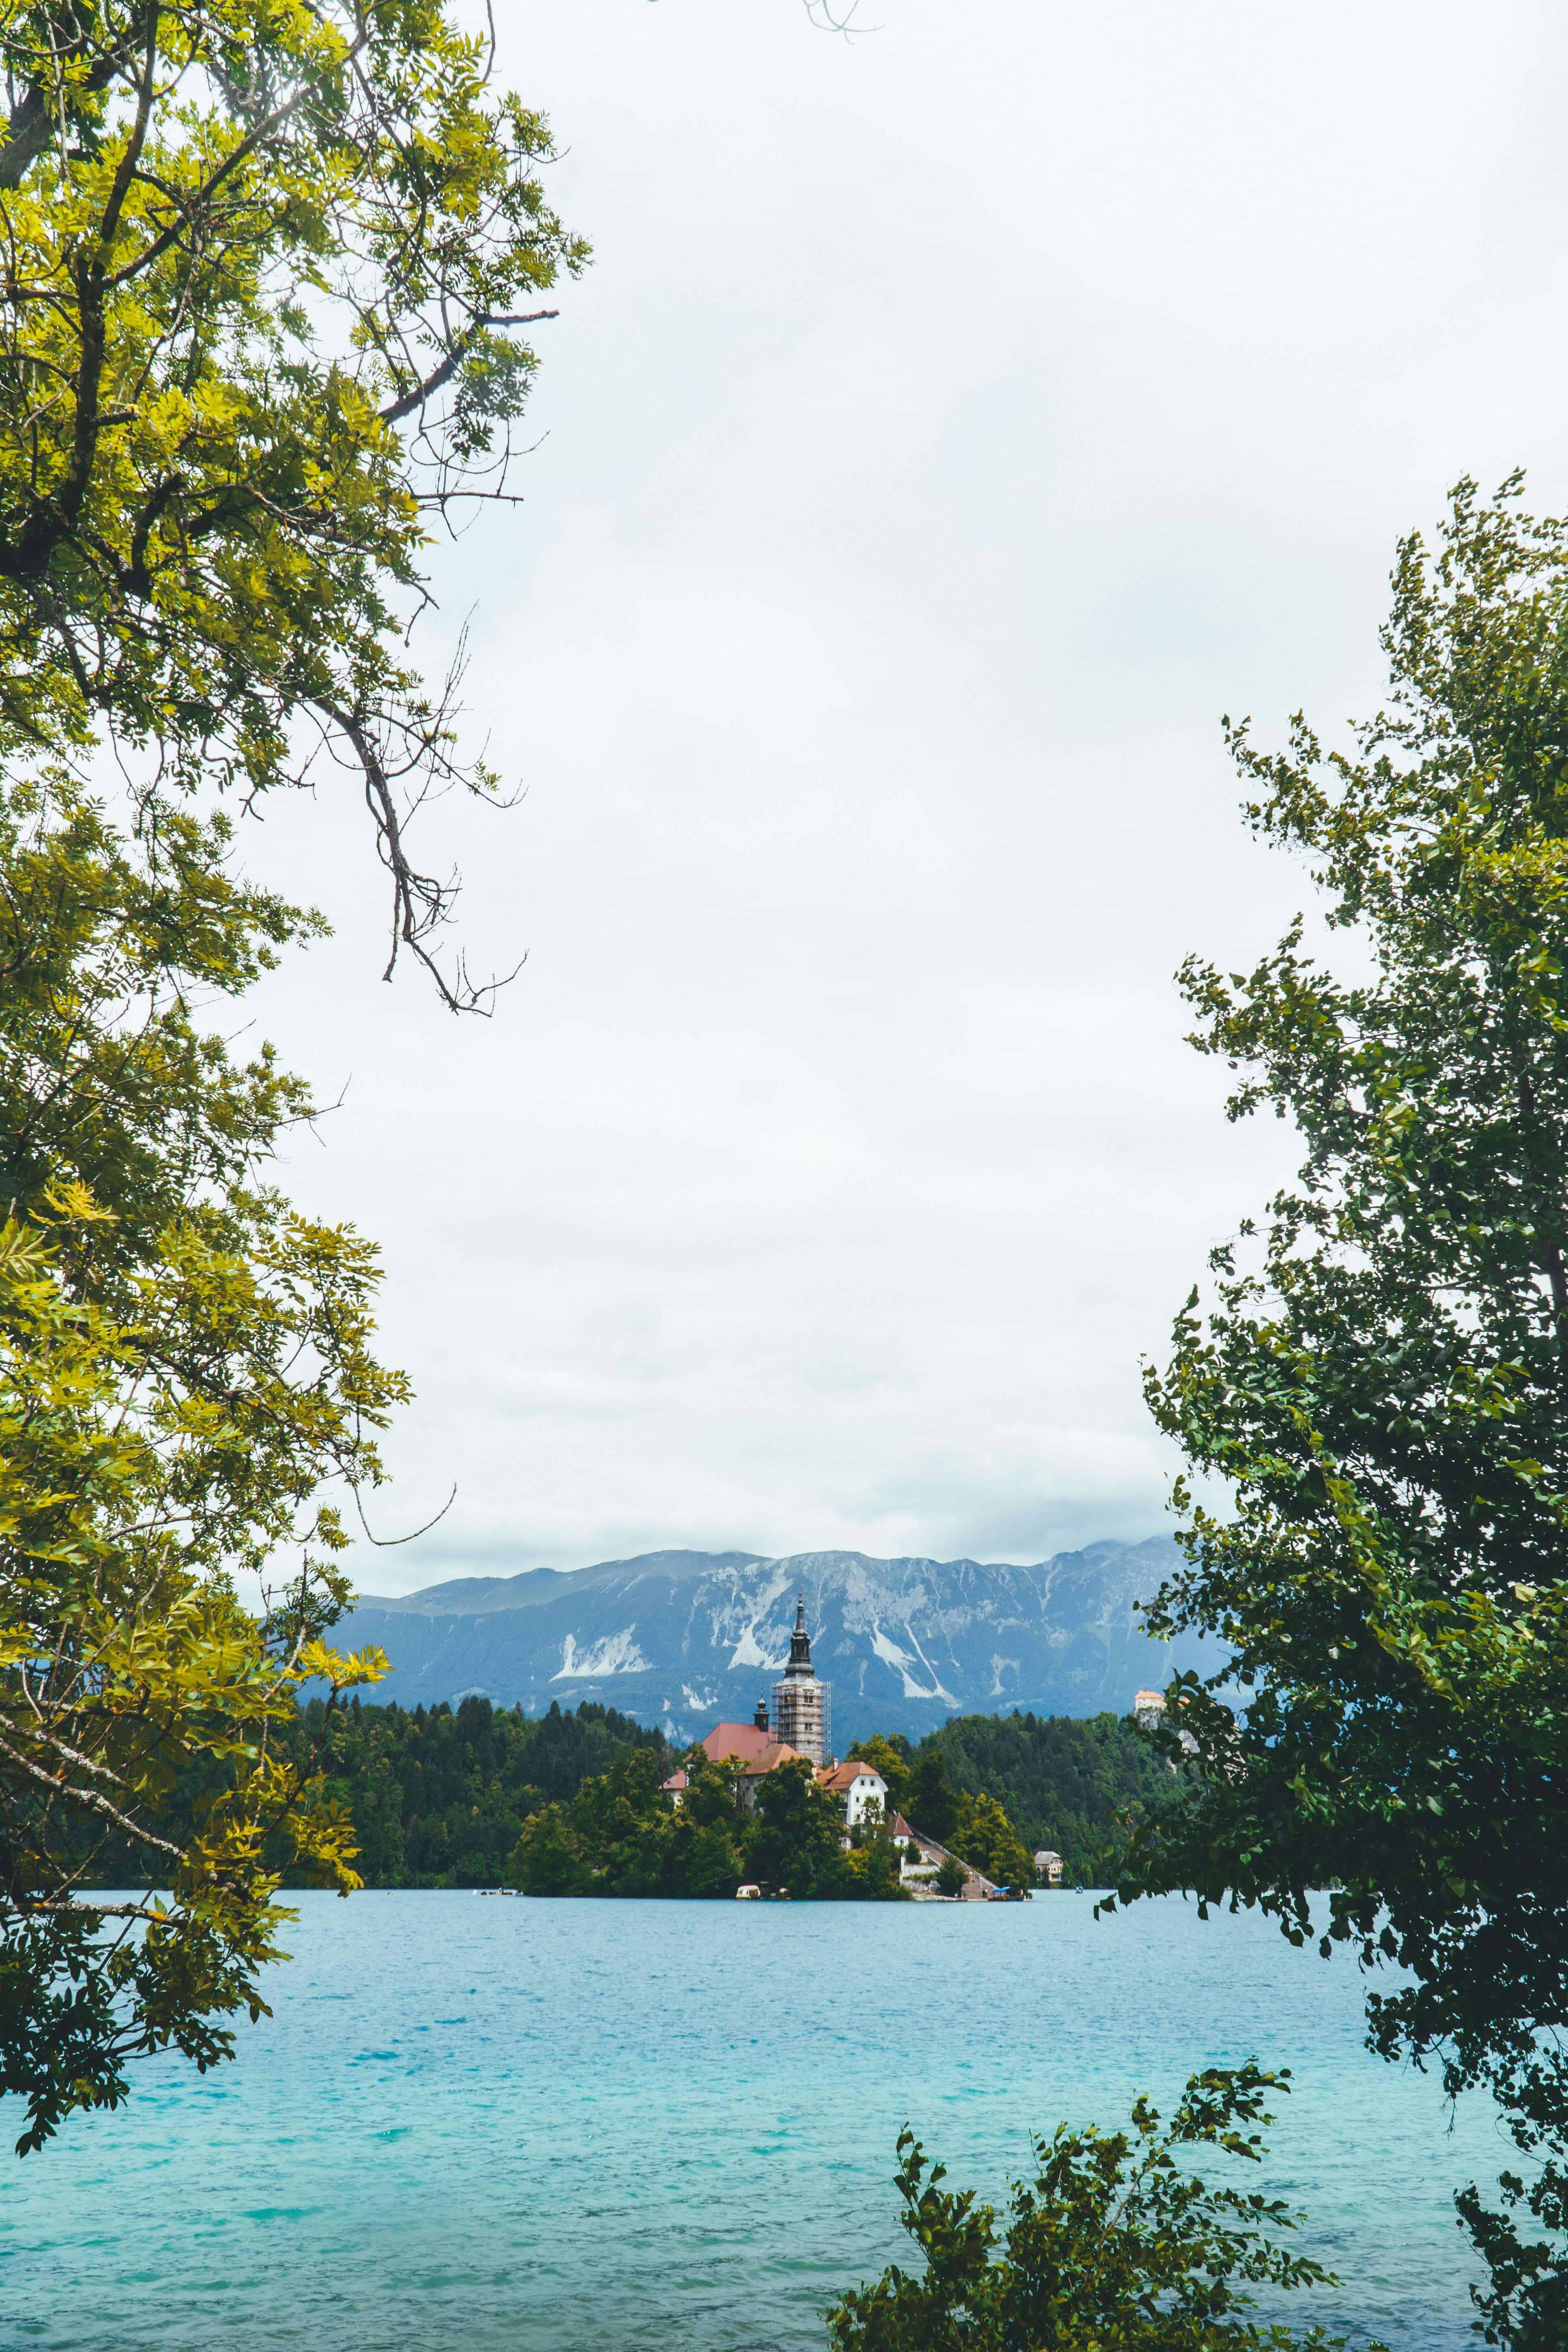 Quick Guide to Lake Bled Slovenia | The Republic of Rose | #Travel #Europe #Slovenia #Bled #LakeBled